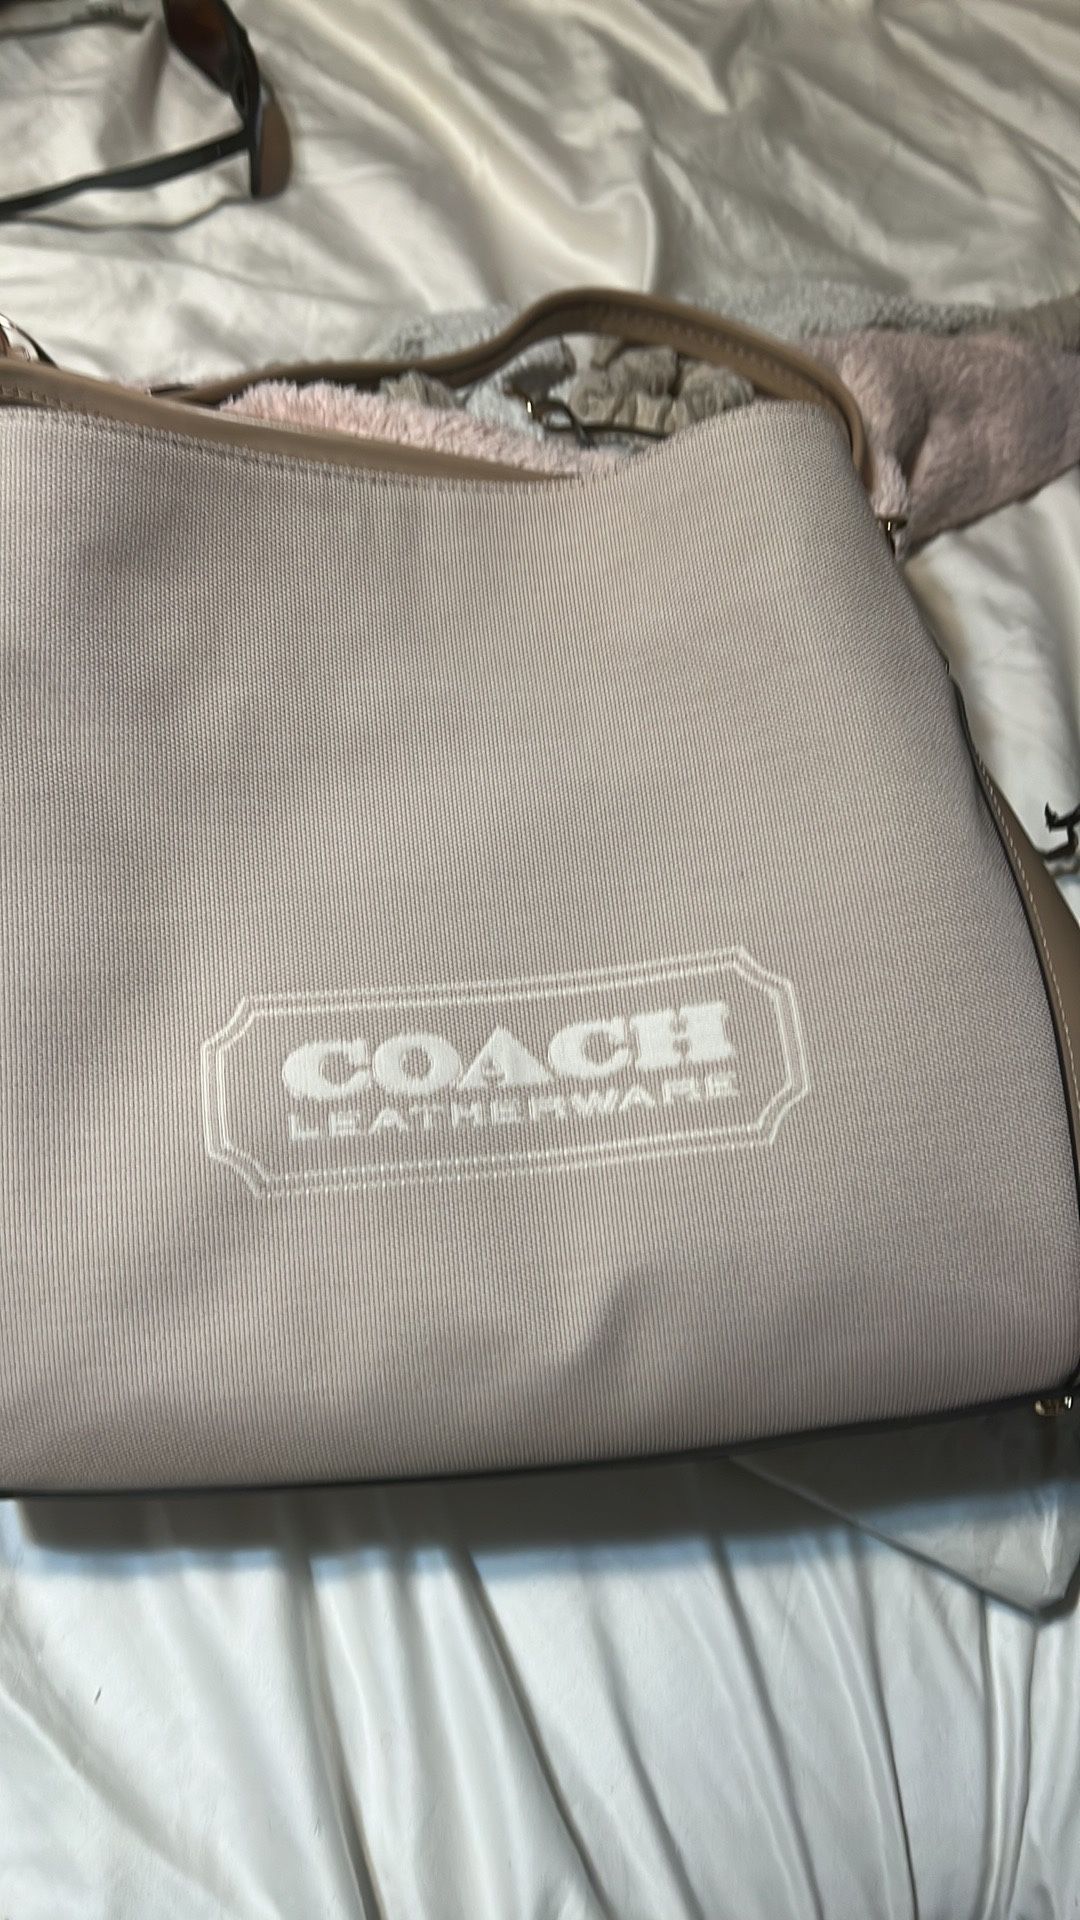 Coach Bag New With Tags 